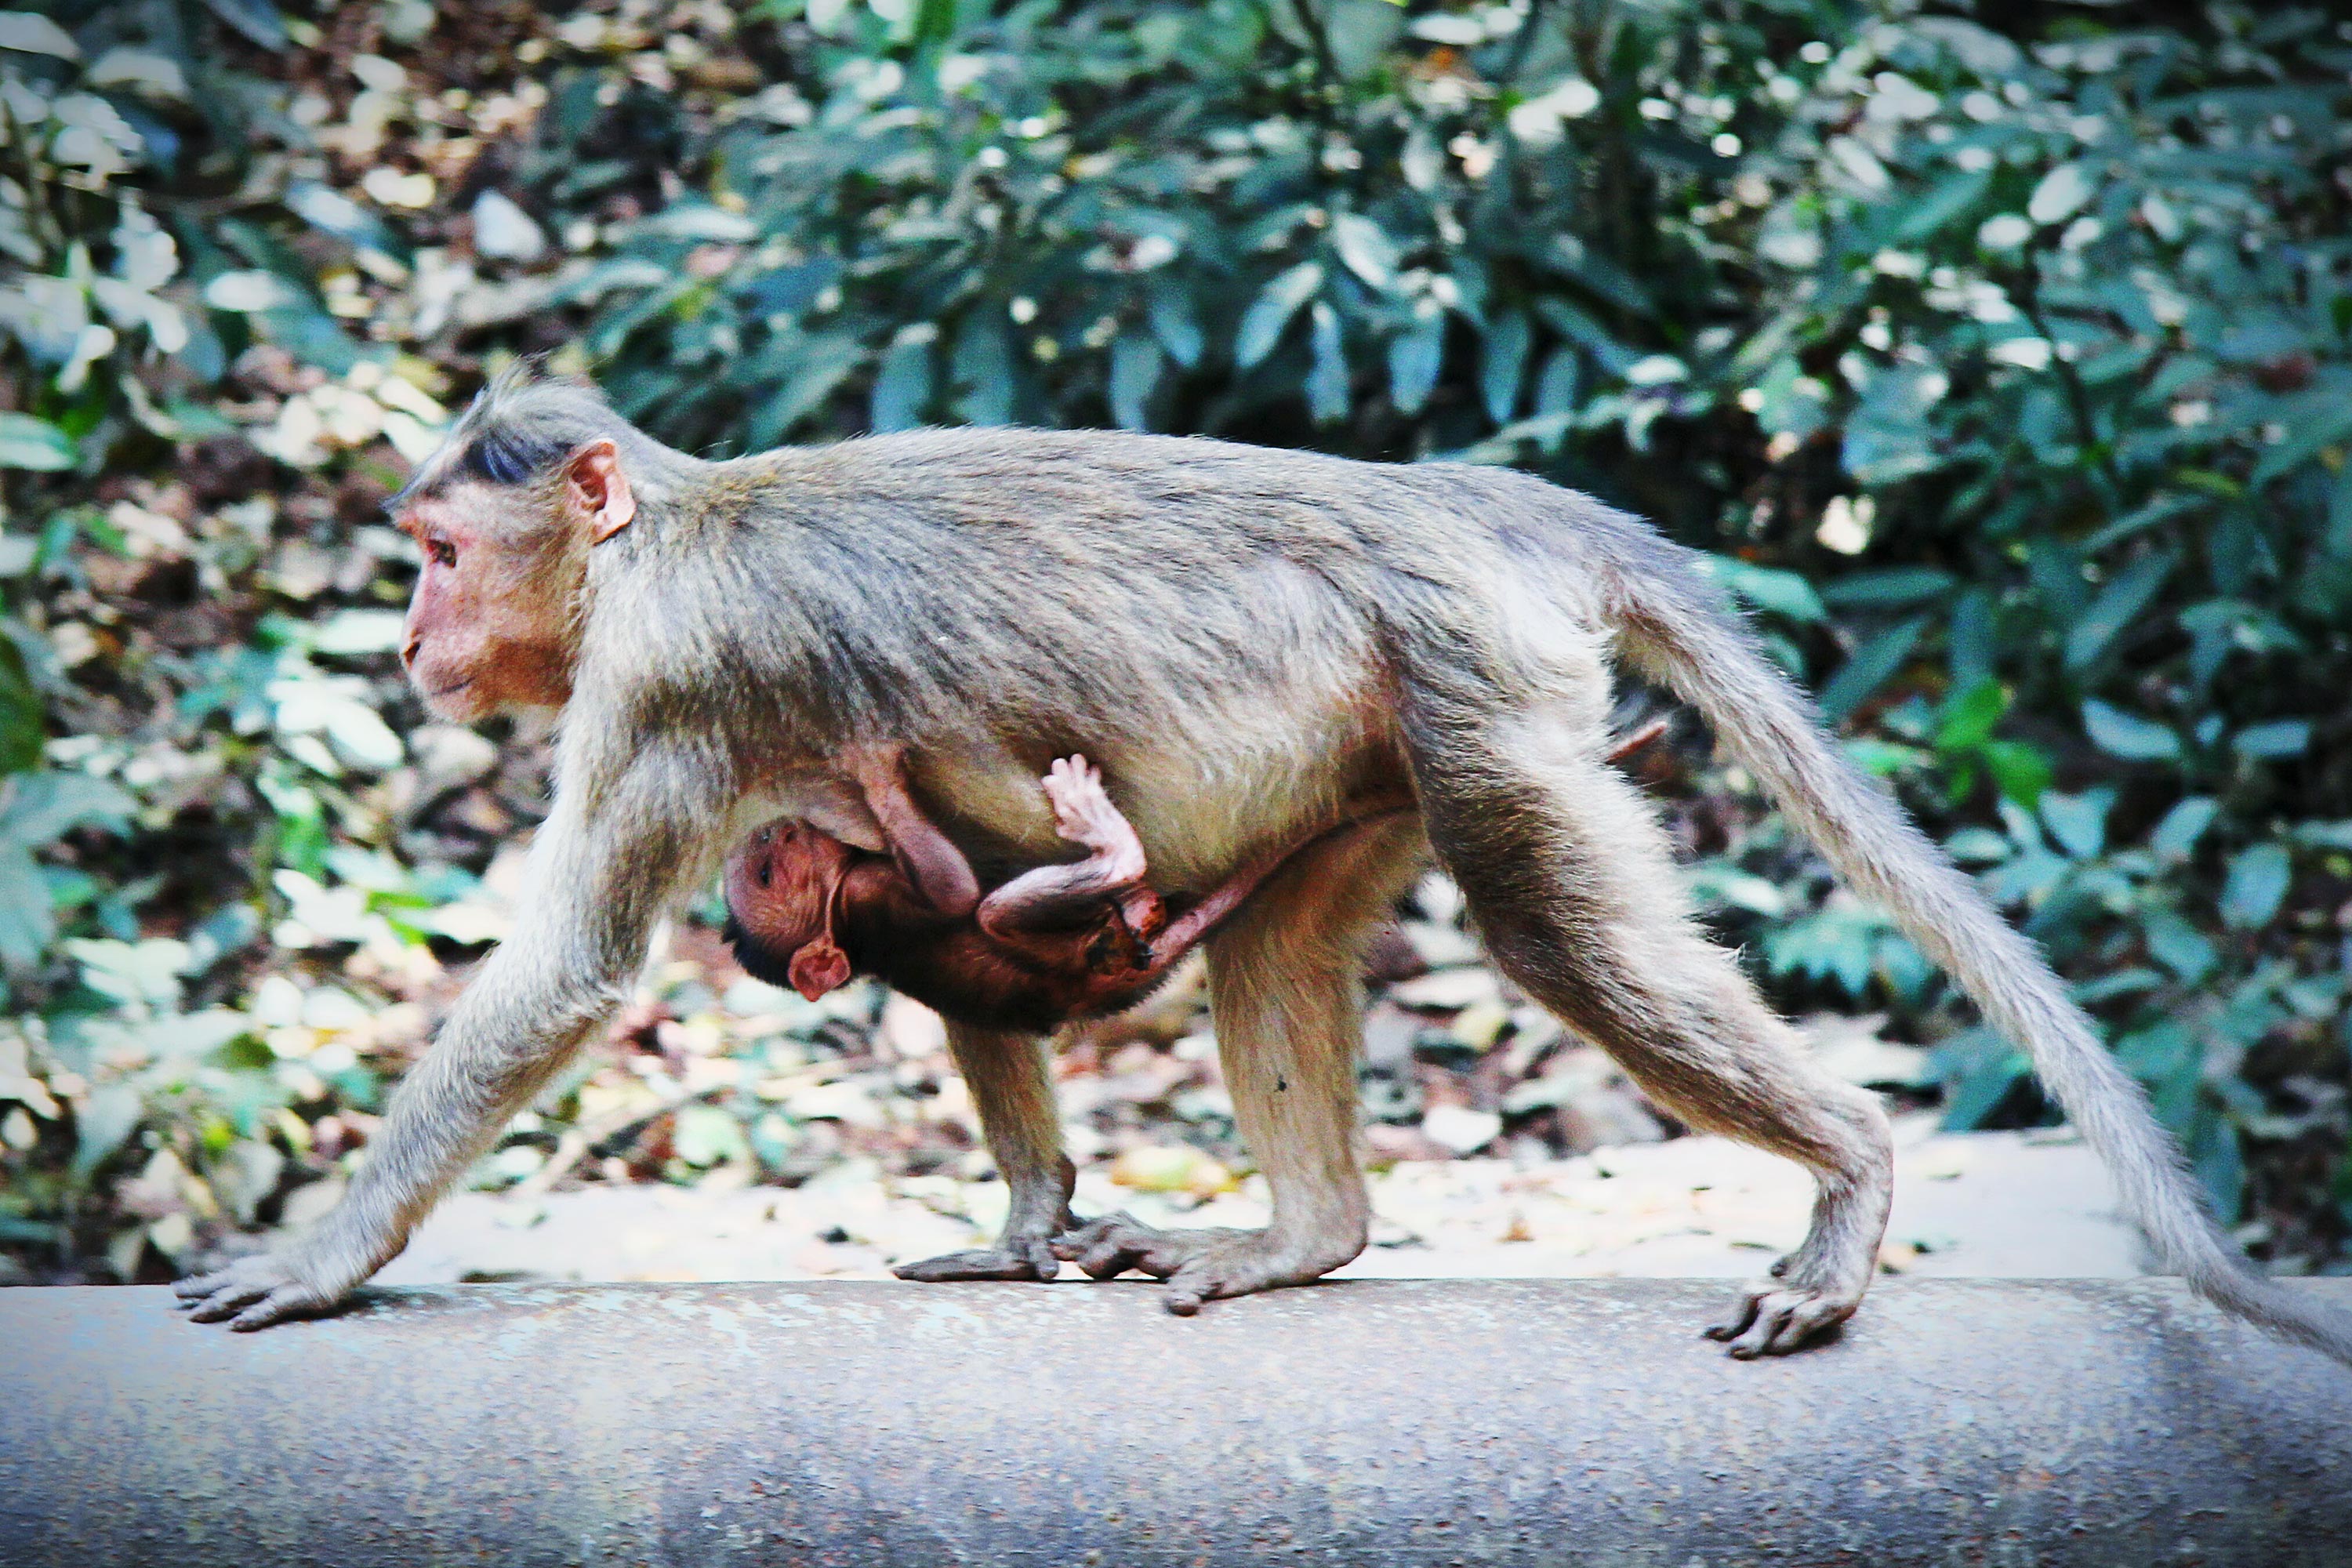 Monkey carrying a baby